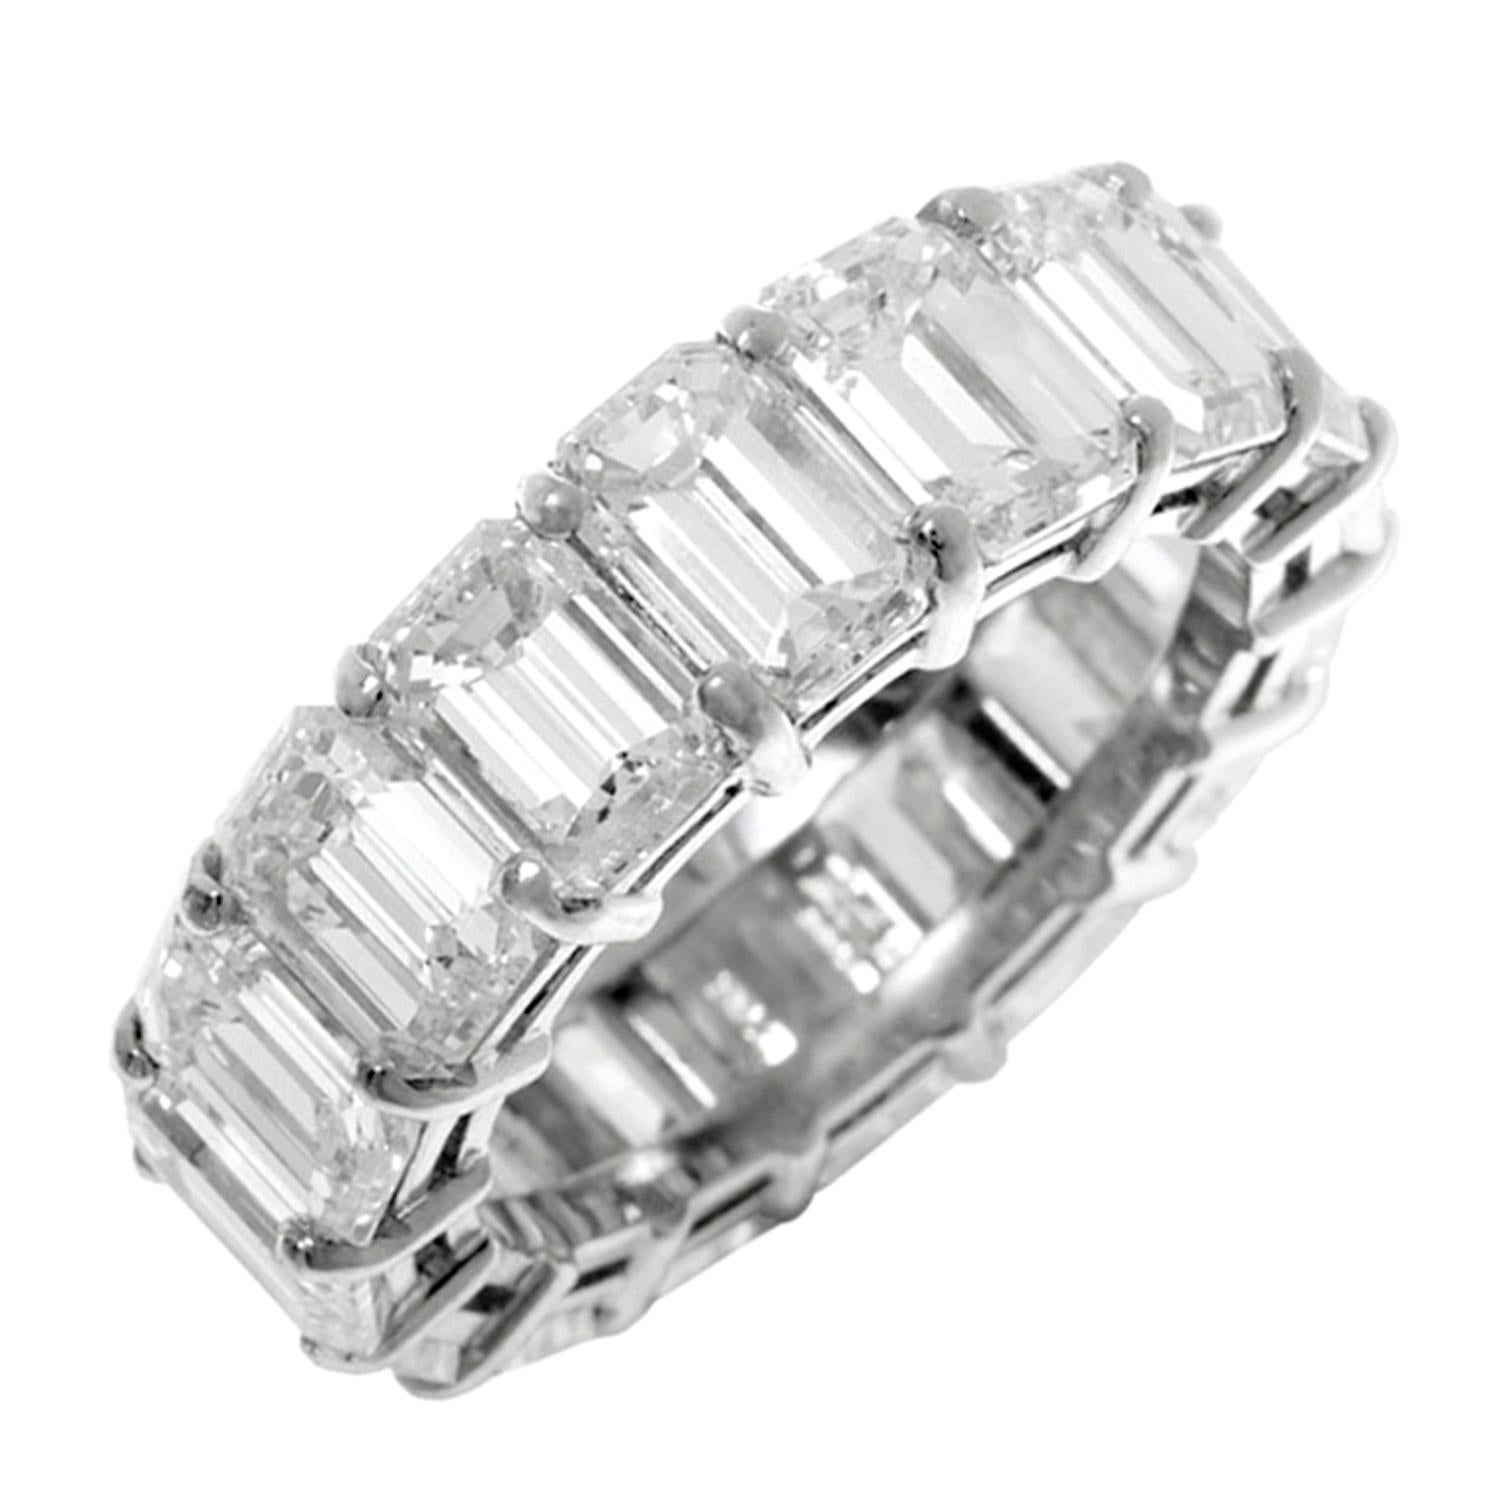 Modern Diana M. PLATINUM ETERNITY DIAMOND WEDDING BAND GIA CERTIFIED WITH 14.10CT  For Sale